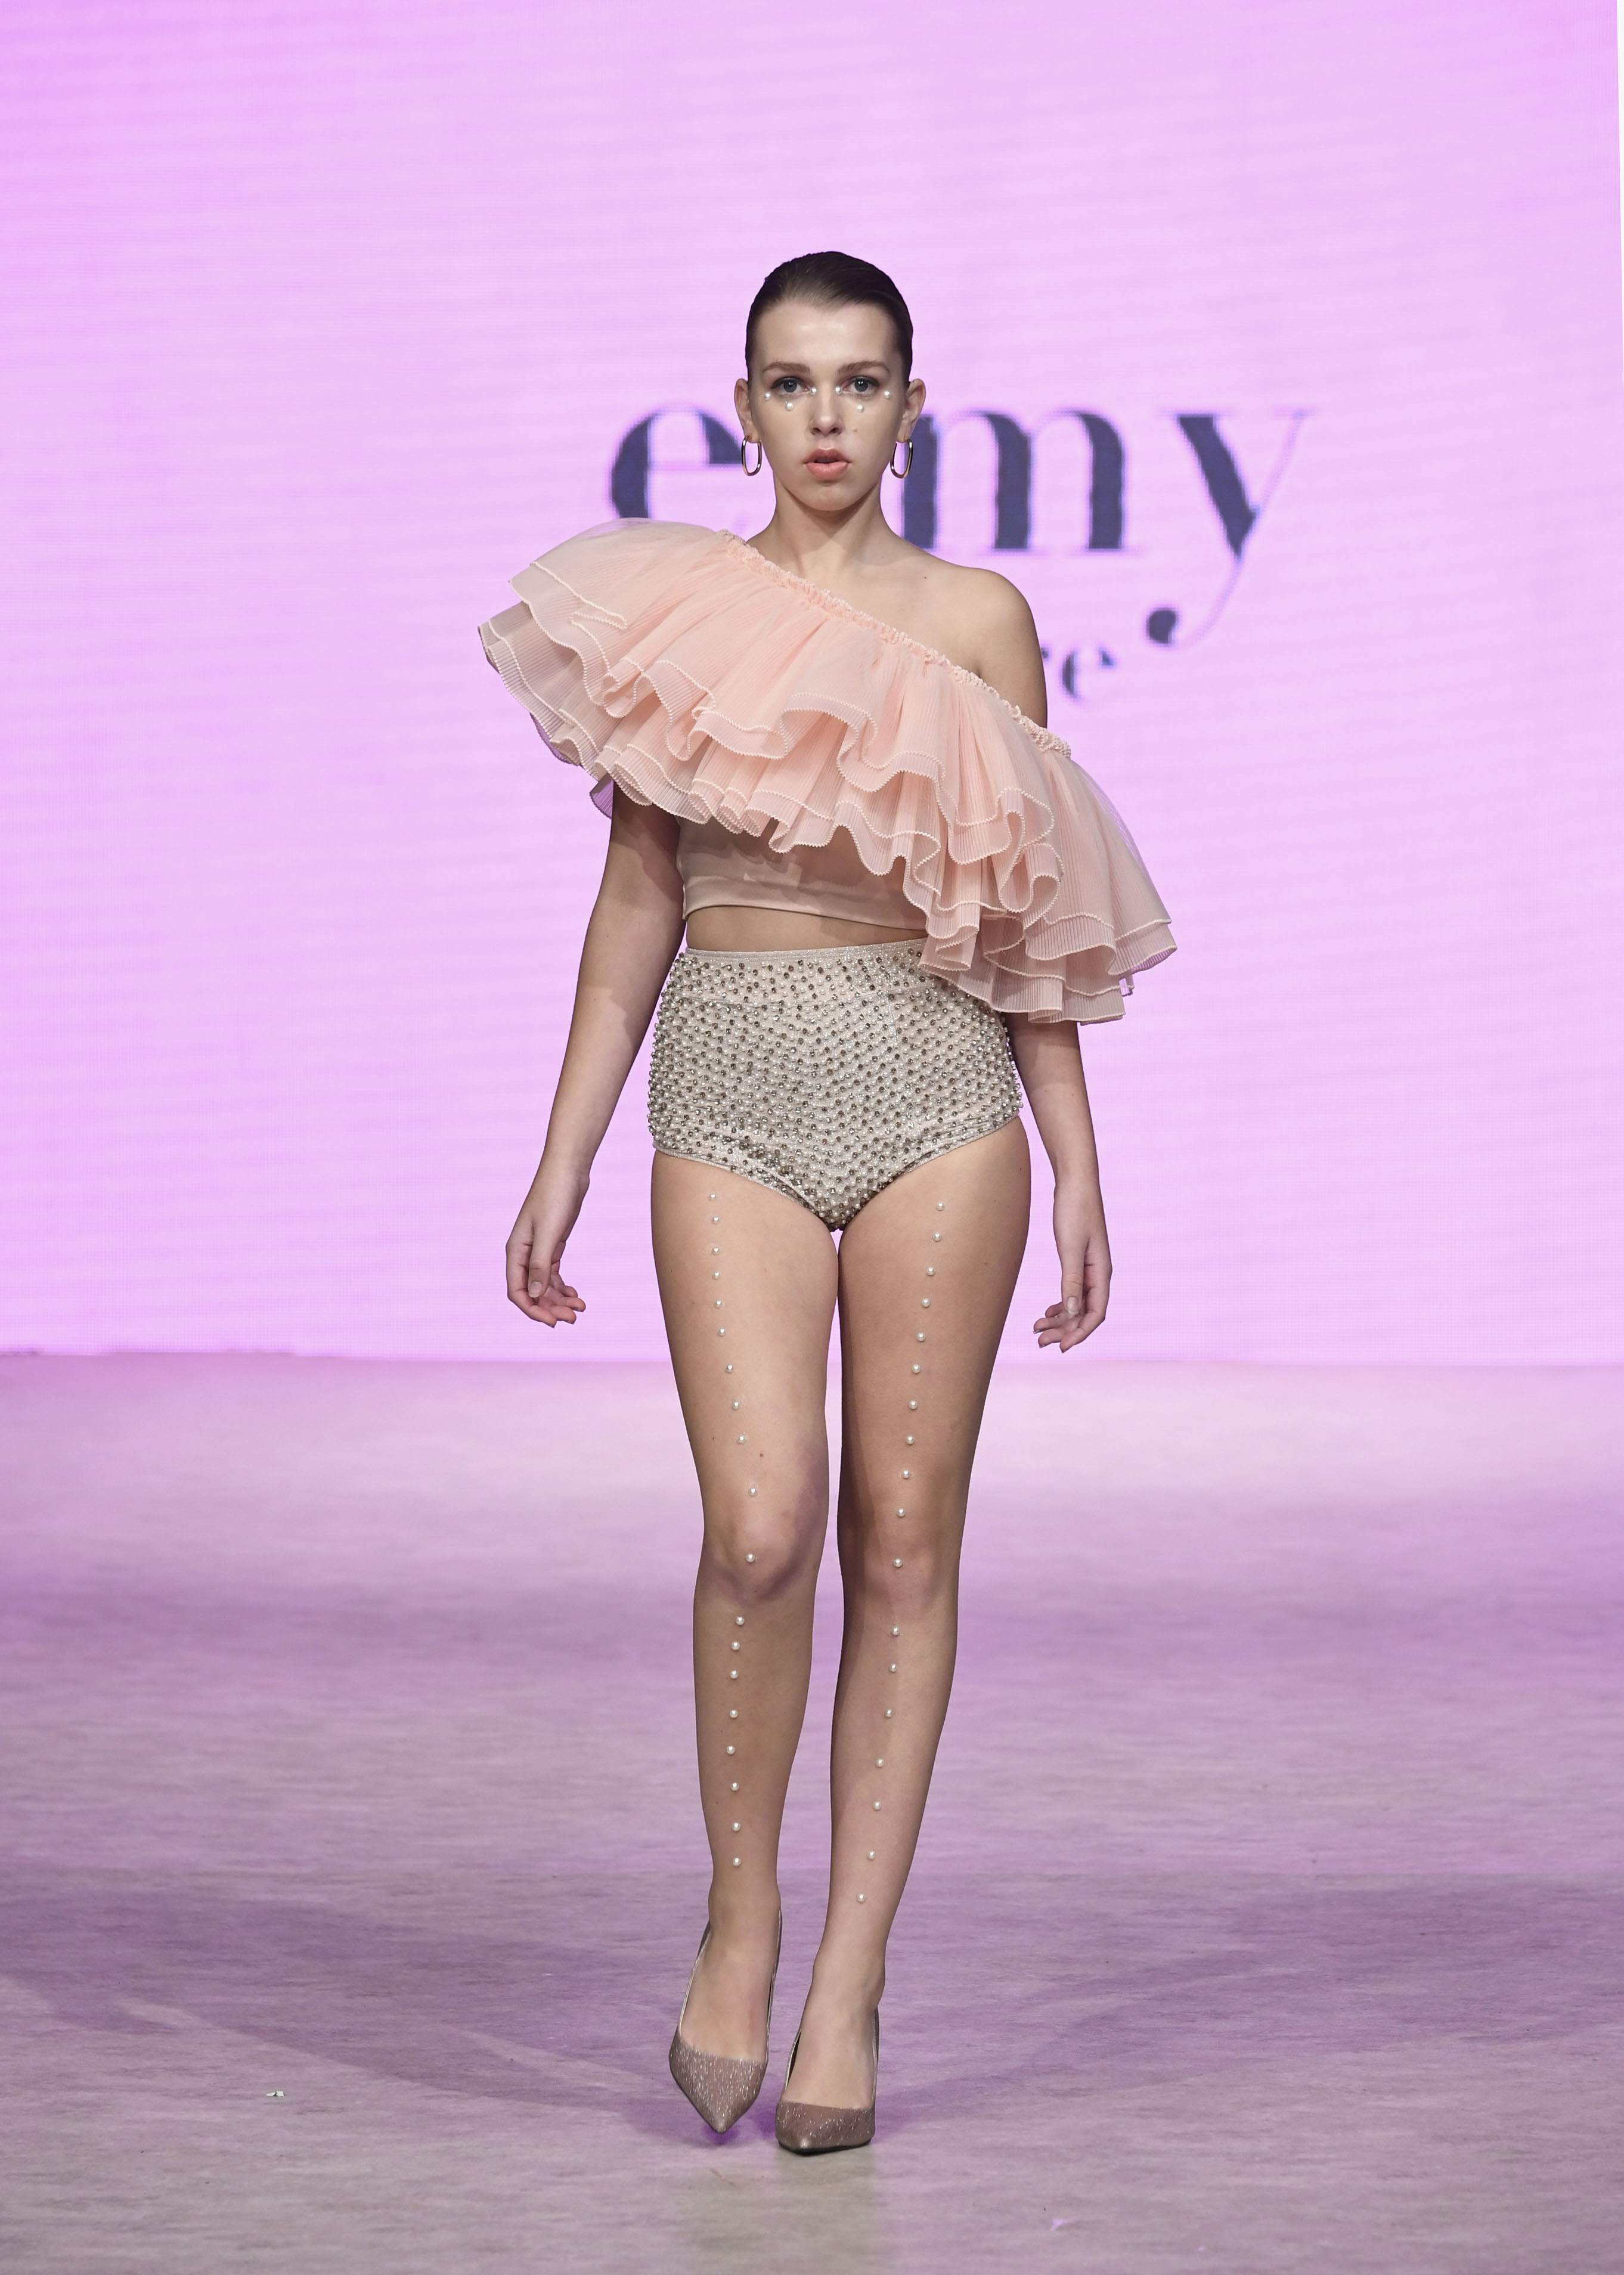 VANCOUVER, BC - SEPTEMBER 22:  A model walks the runway wearing eimy istoire at Vancouver Fashion Week Spring/Summer 19 - Day 6on September 22, 2018 in Vancouver, Canada.  (Photo by Arun Nevader/Getty Images for VFW Management INC)